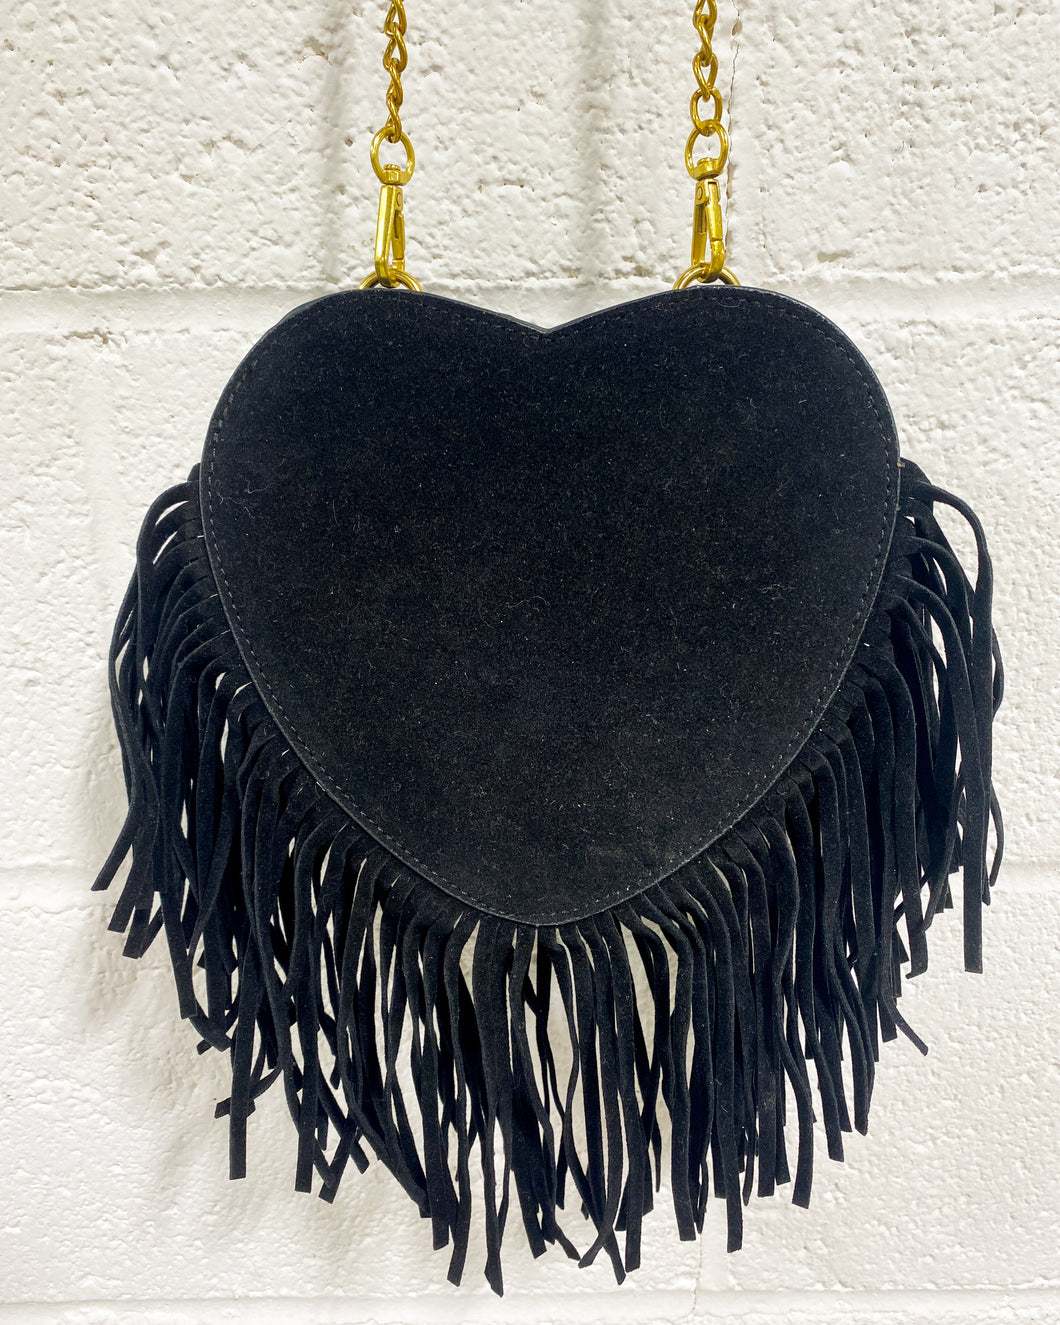 Faux Suede Black Heart Purse with Fringe